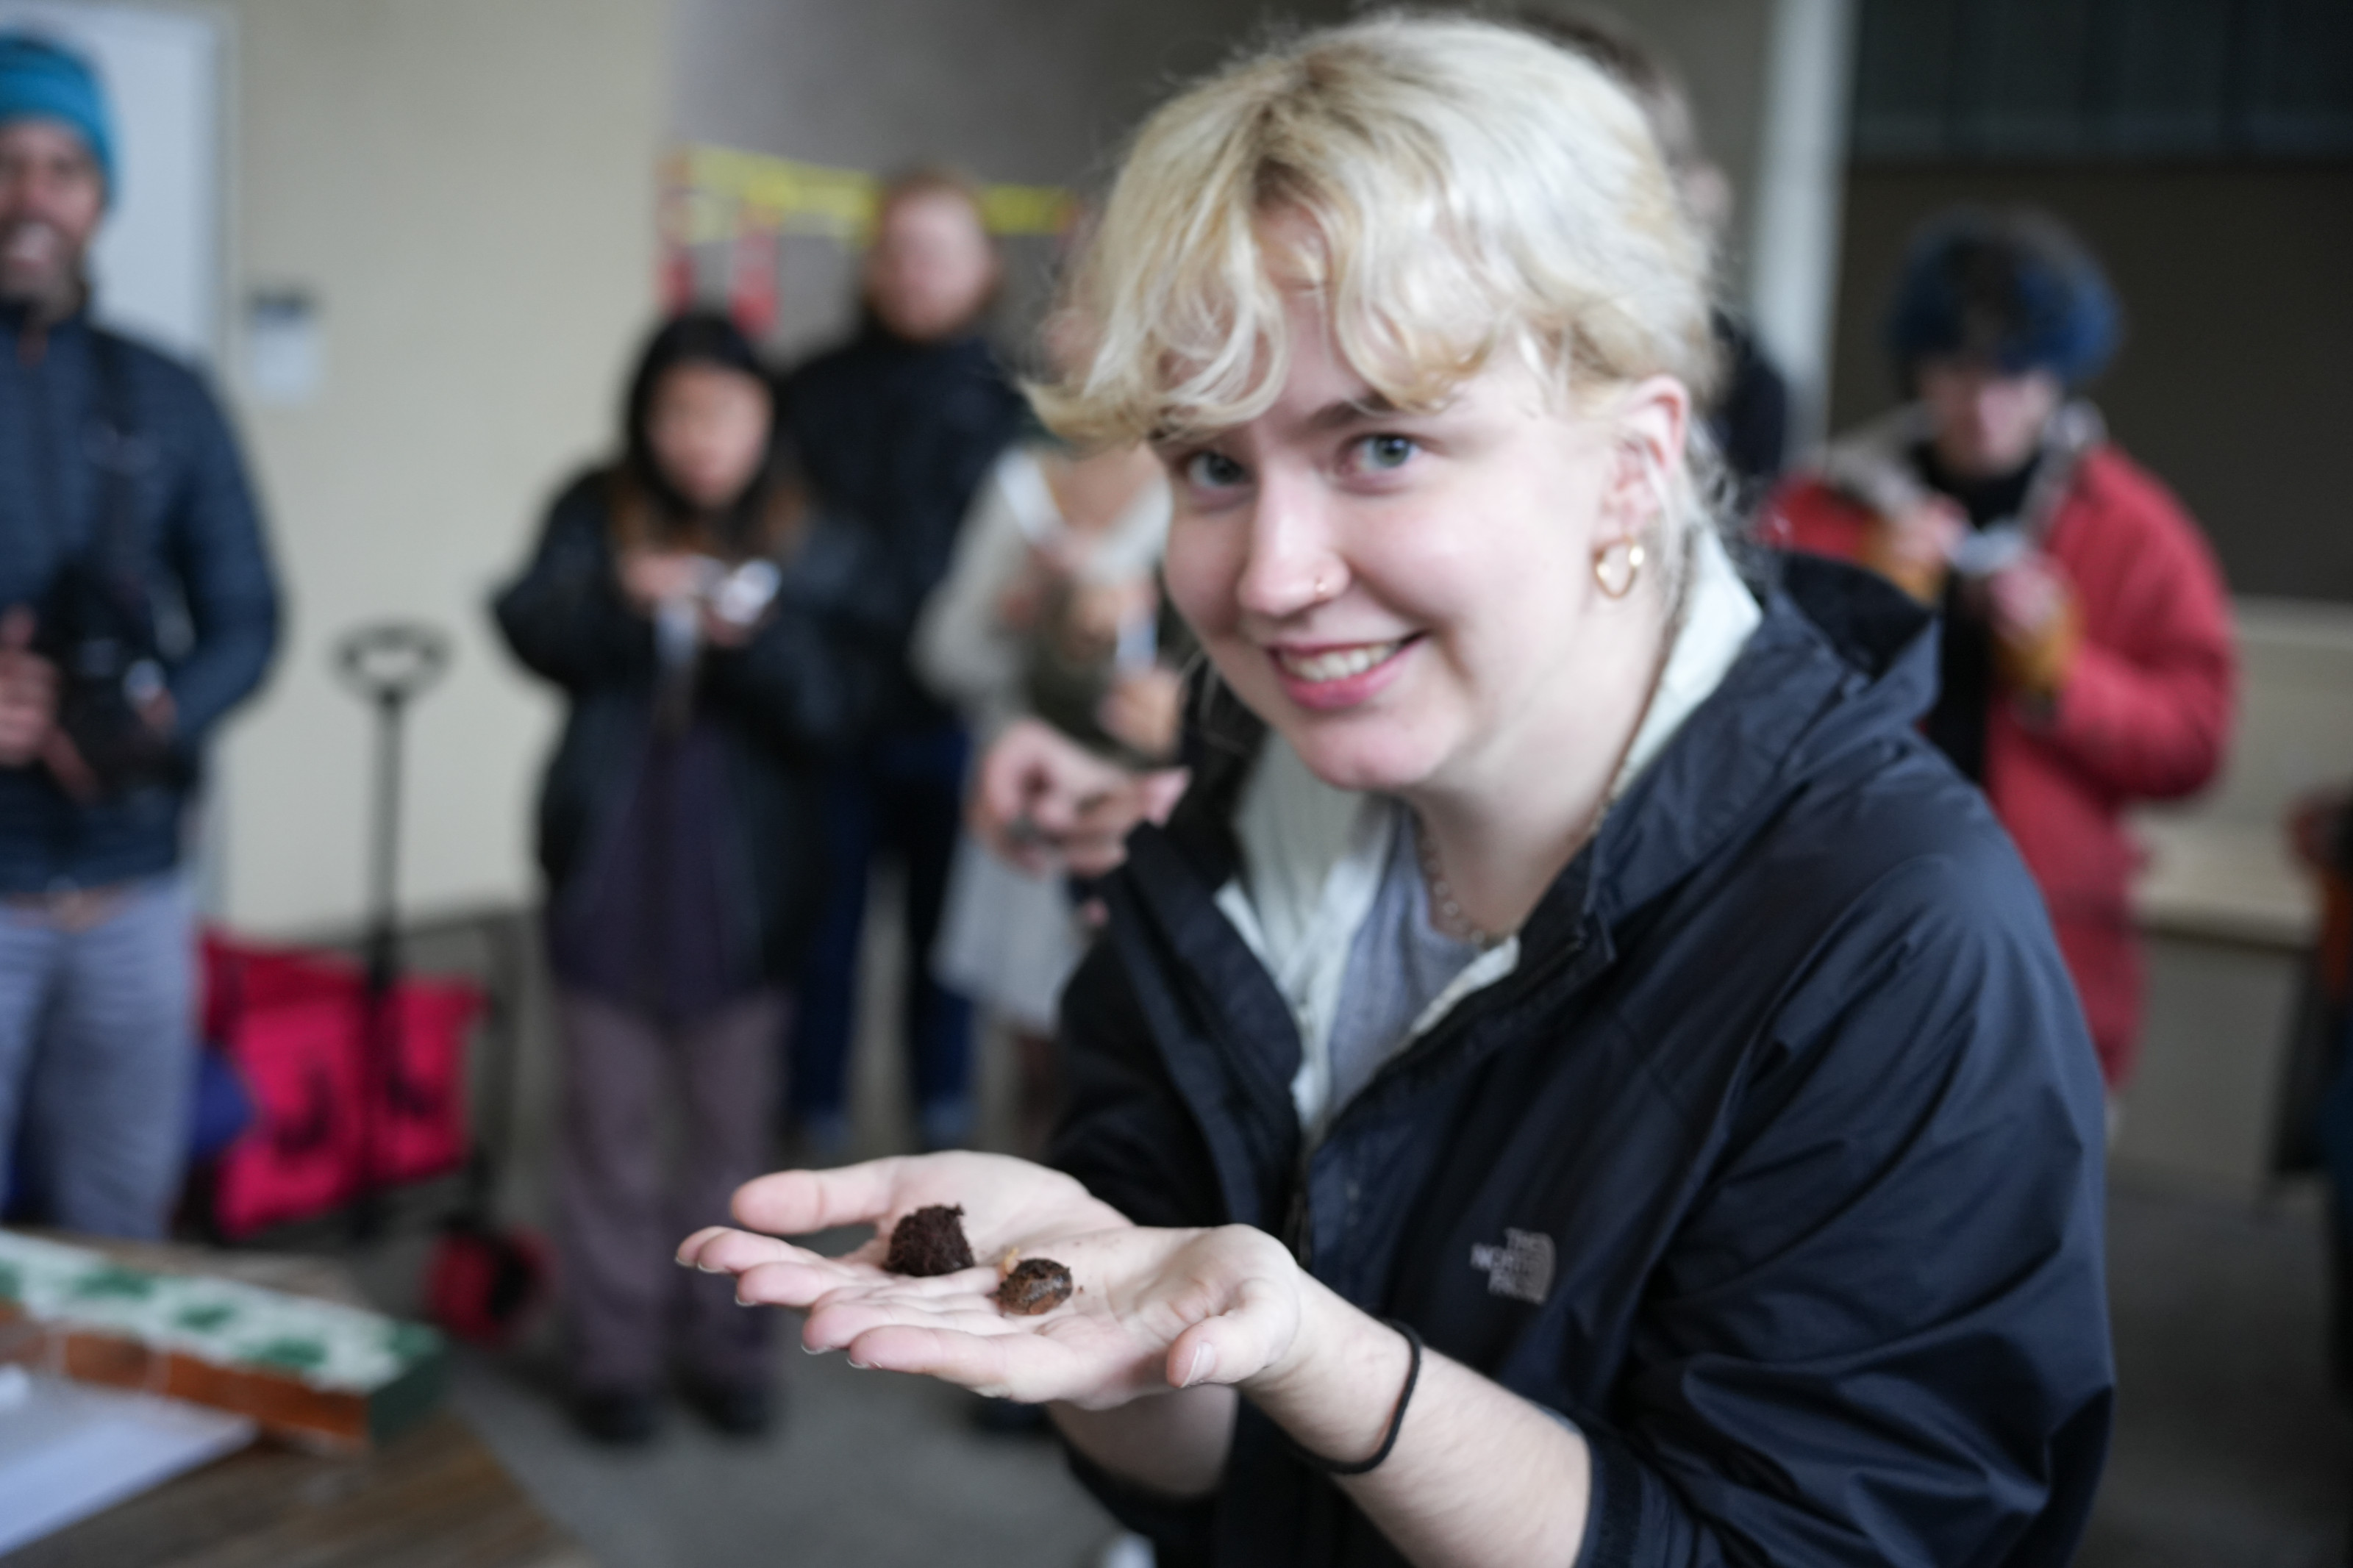 A student smiles as they hold a slug in their hands.